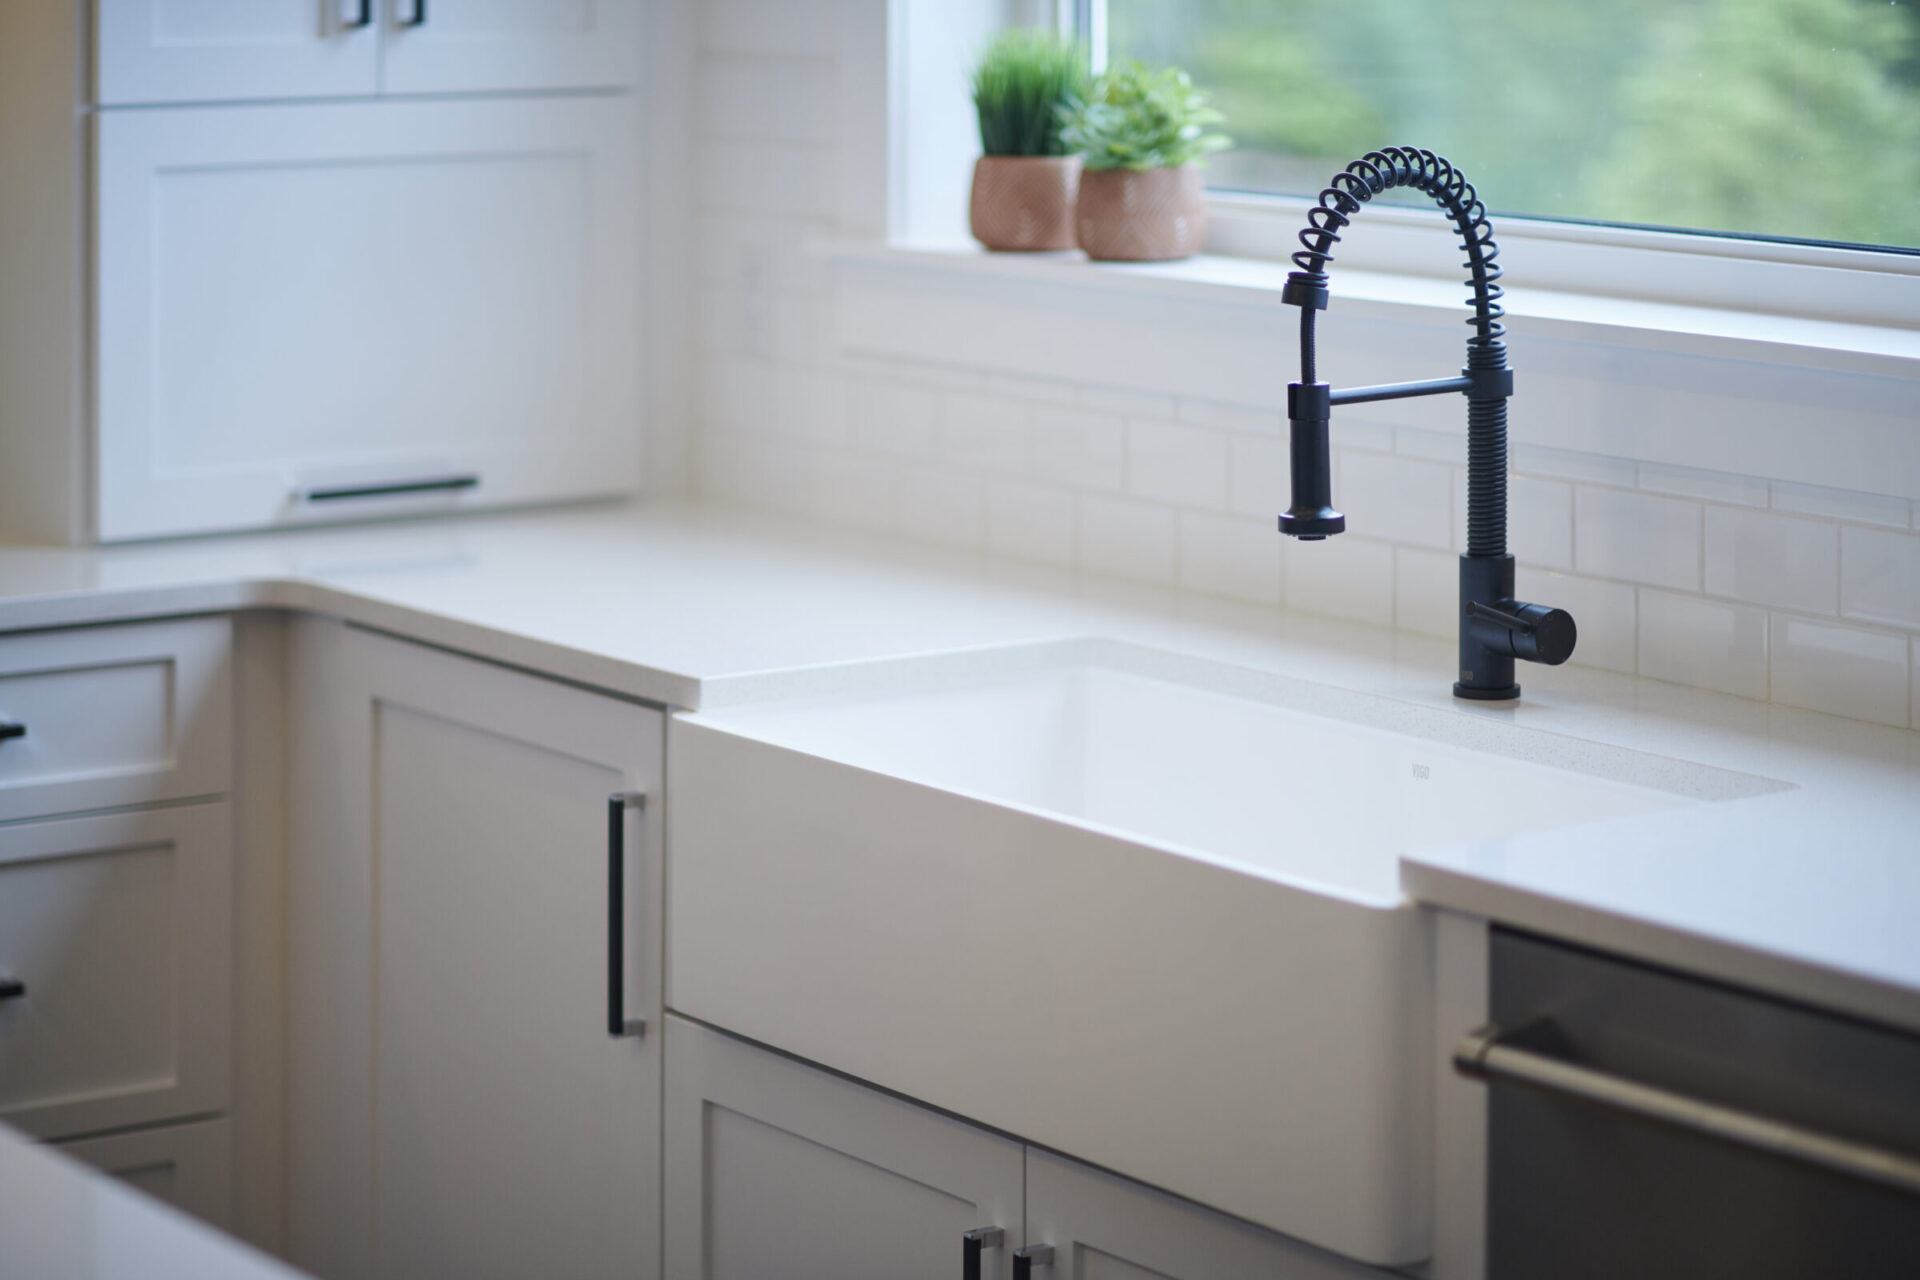 A modern kitchen sink with a black faucet, white countertops, and cabinetry. A window provides natural light and shows greenery outside.